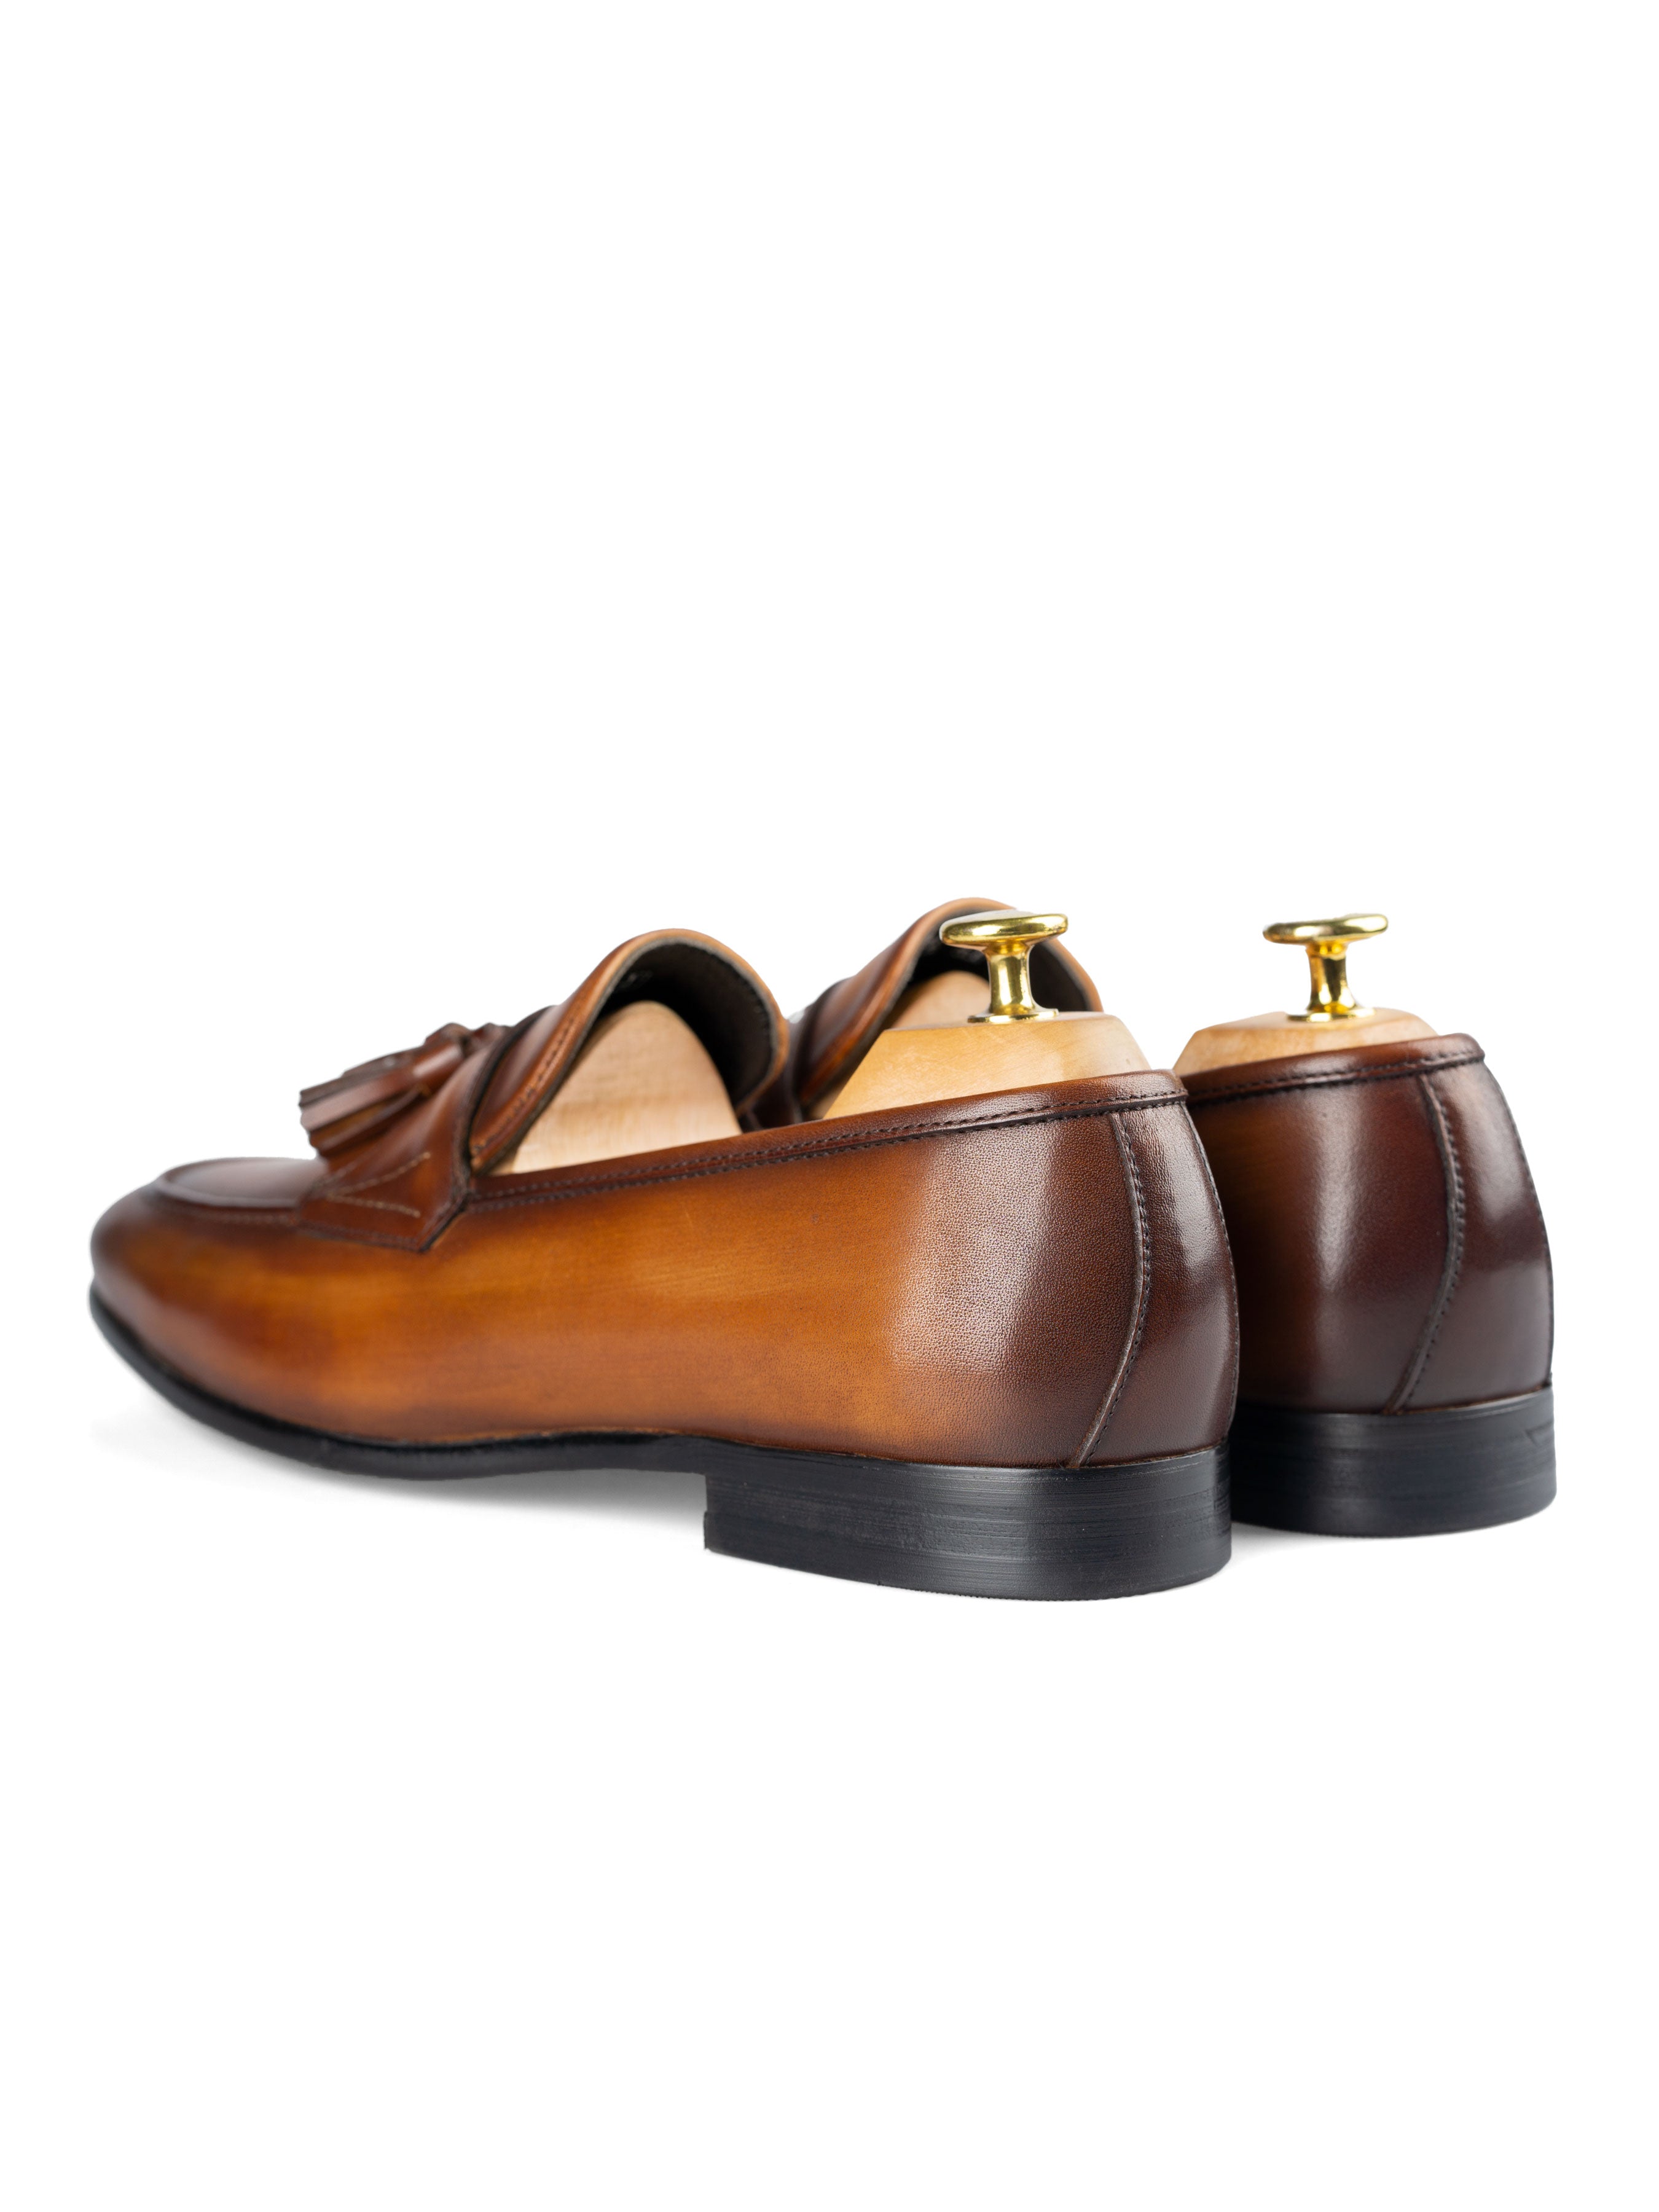 Tassel Loafer Wing Strap - Cognac Tan (Hand Painted Patina) - Zeve Shoes